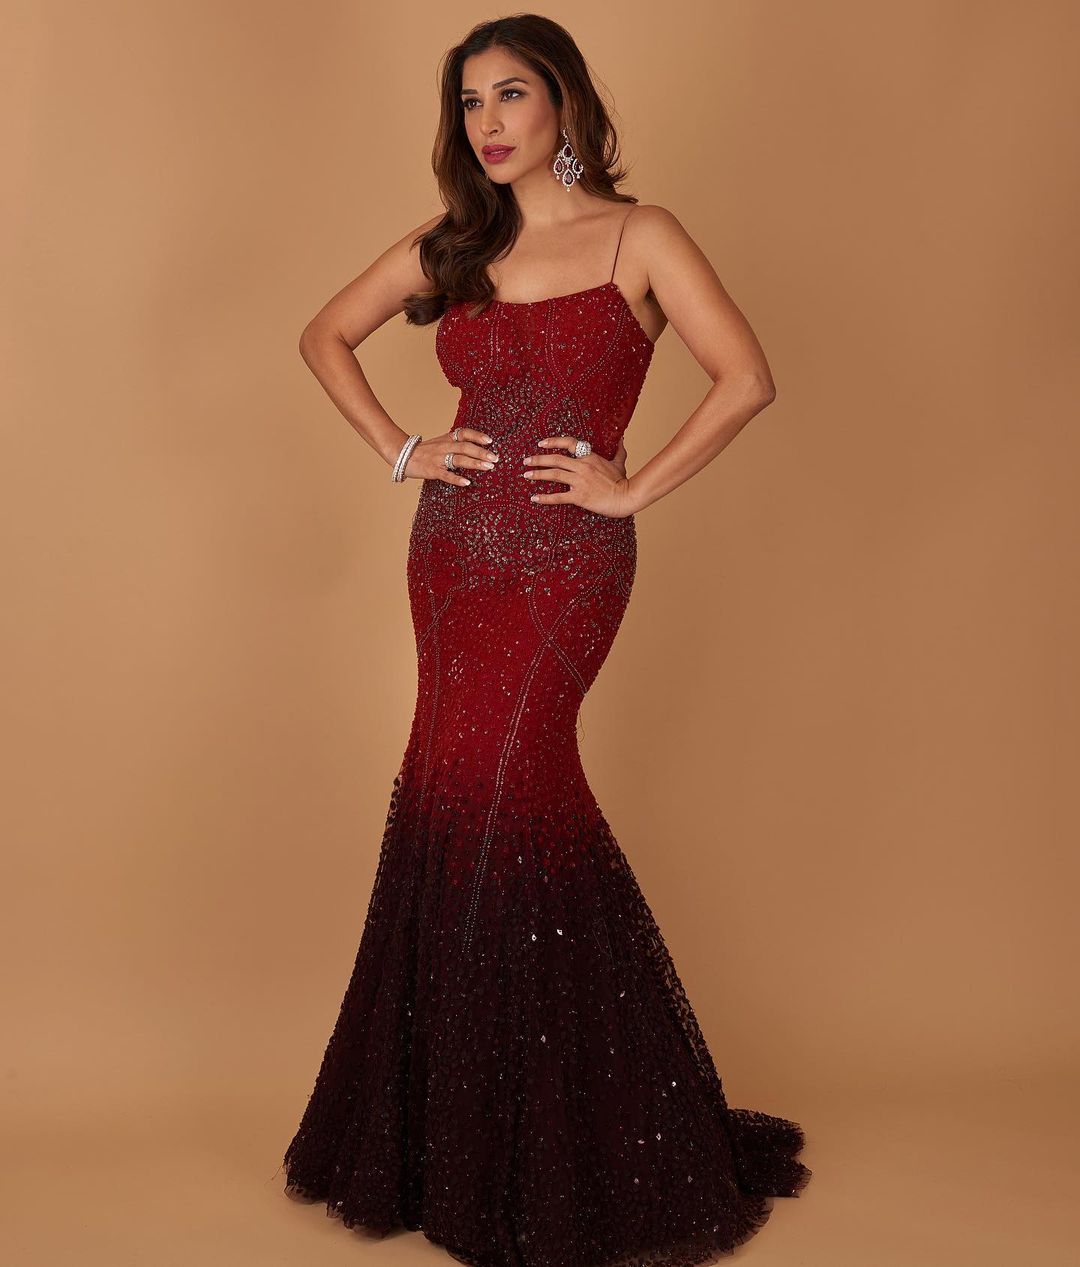 Sophie Choudry flaunts her curvaceous figure in a bodycon gown